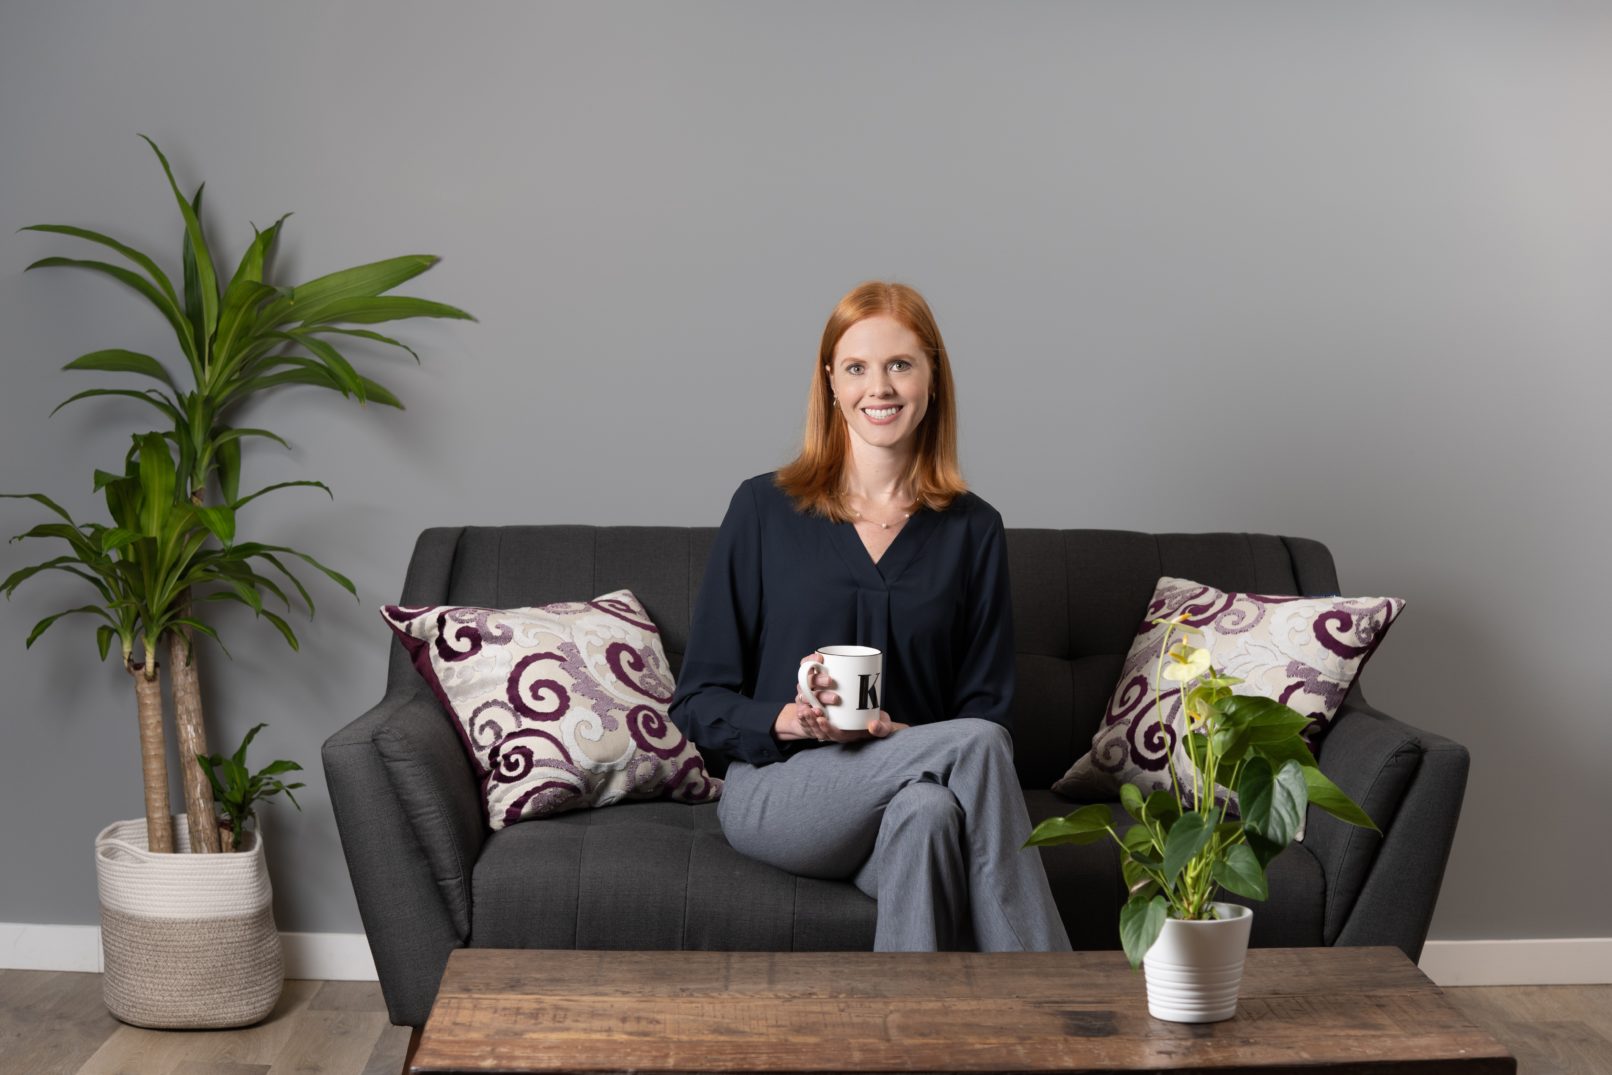 Portrait-Personal Branding photo of a redhead woman sitting on a black couch with two pillows while she holds a white mug with the letter K printed on it in black.